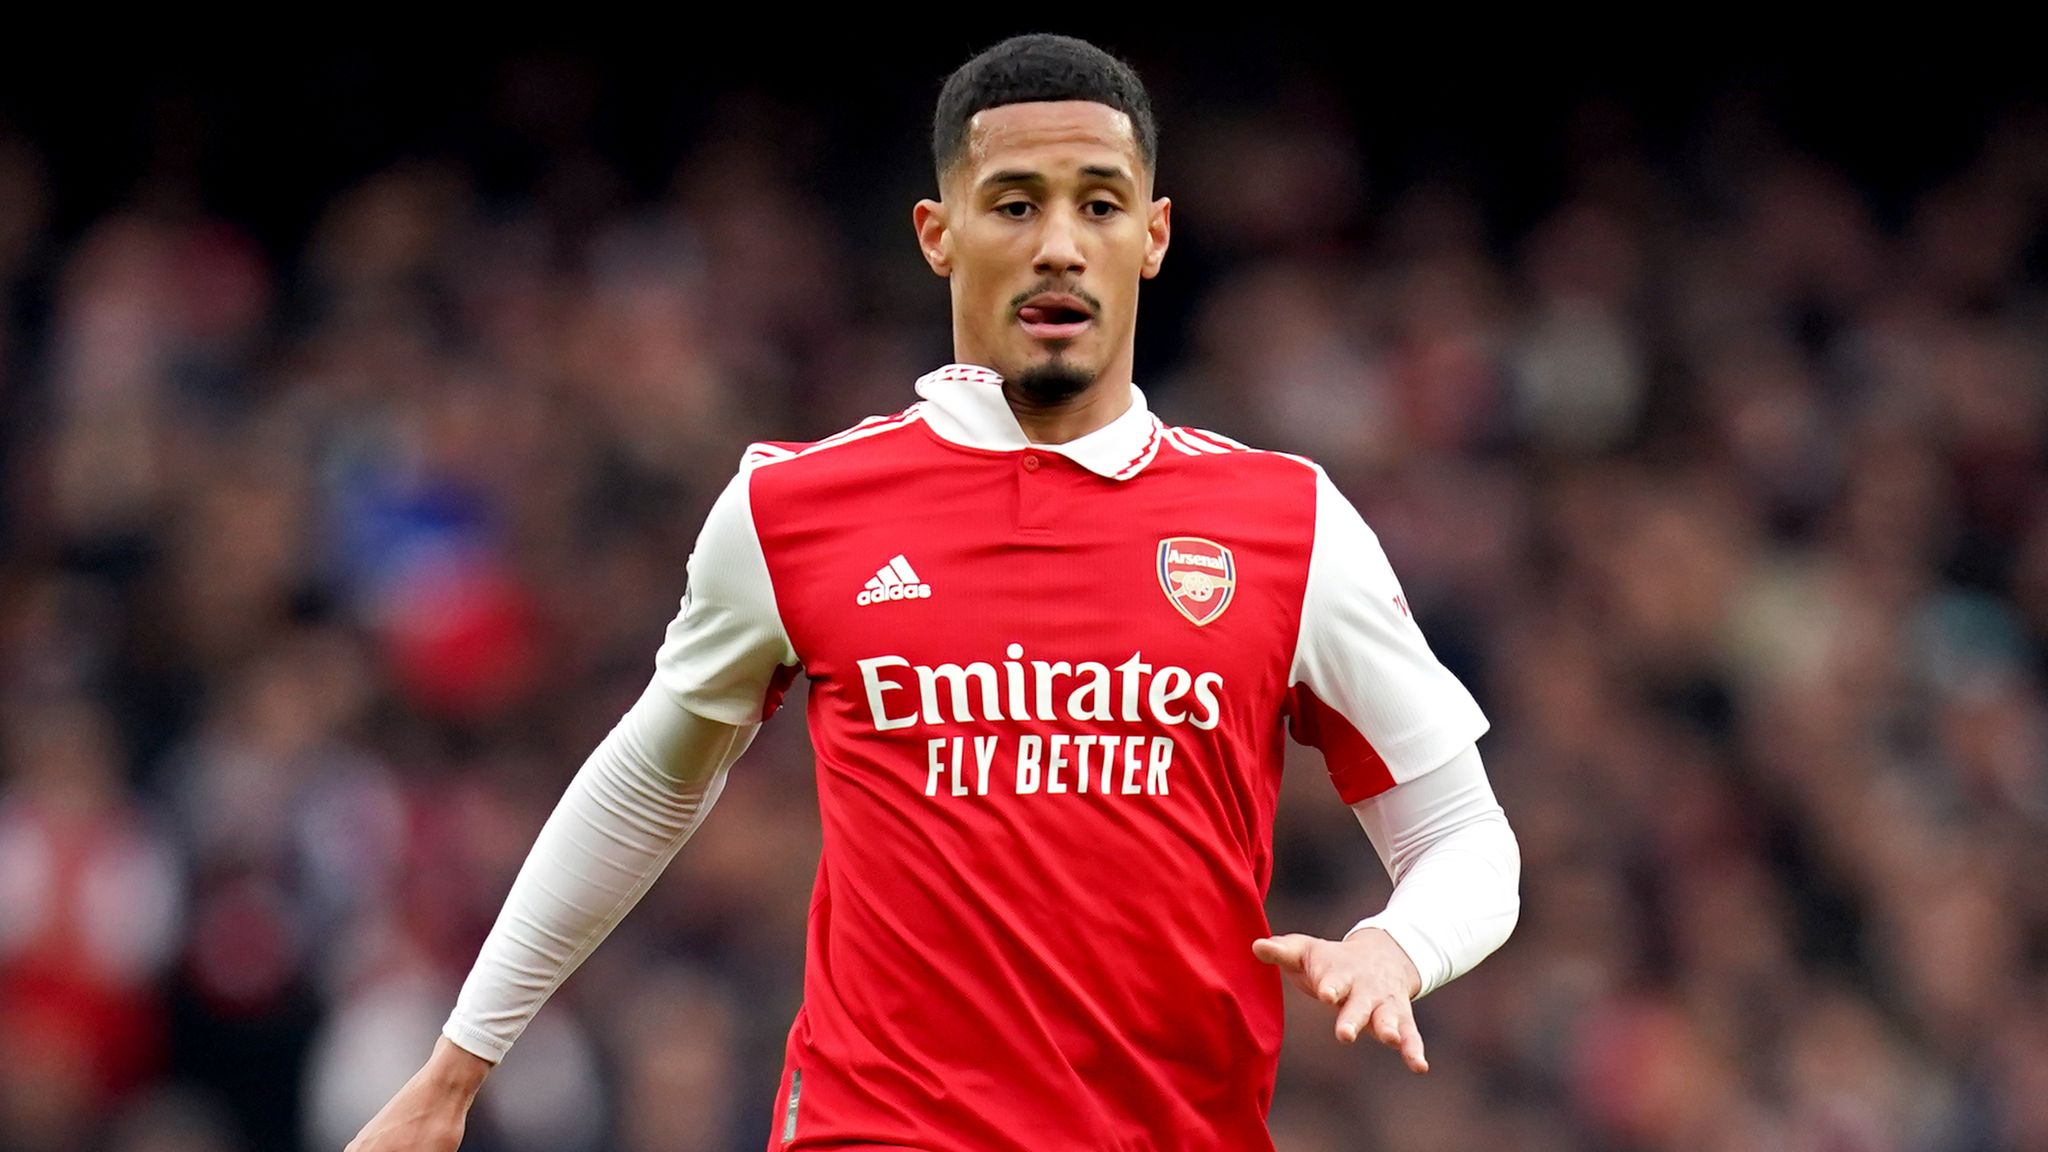  William Saliba, a defender for Arsenal, is playing in a match.